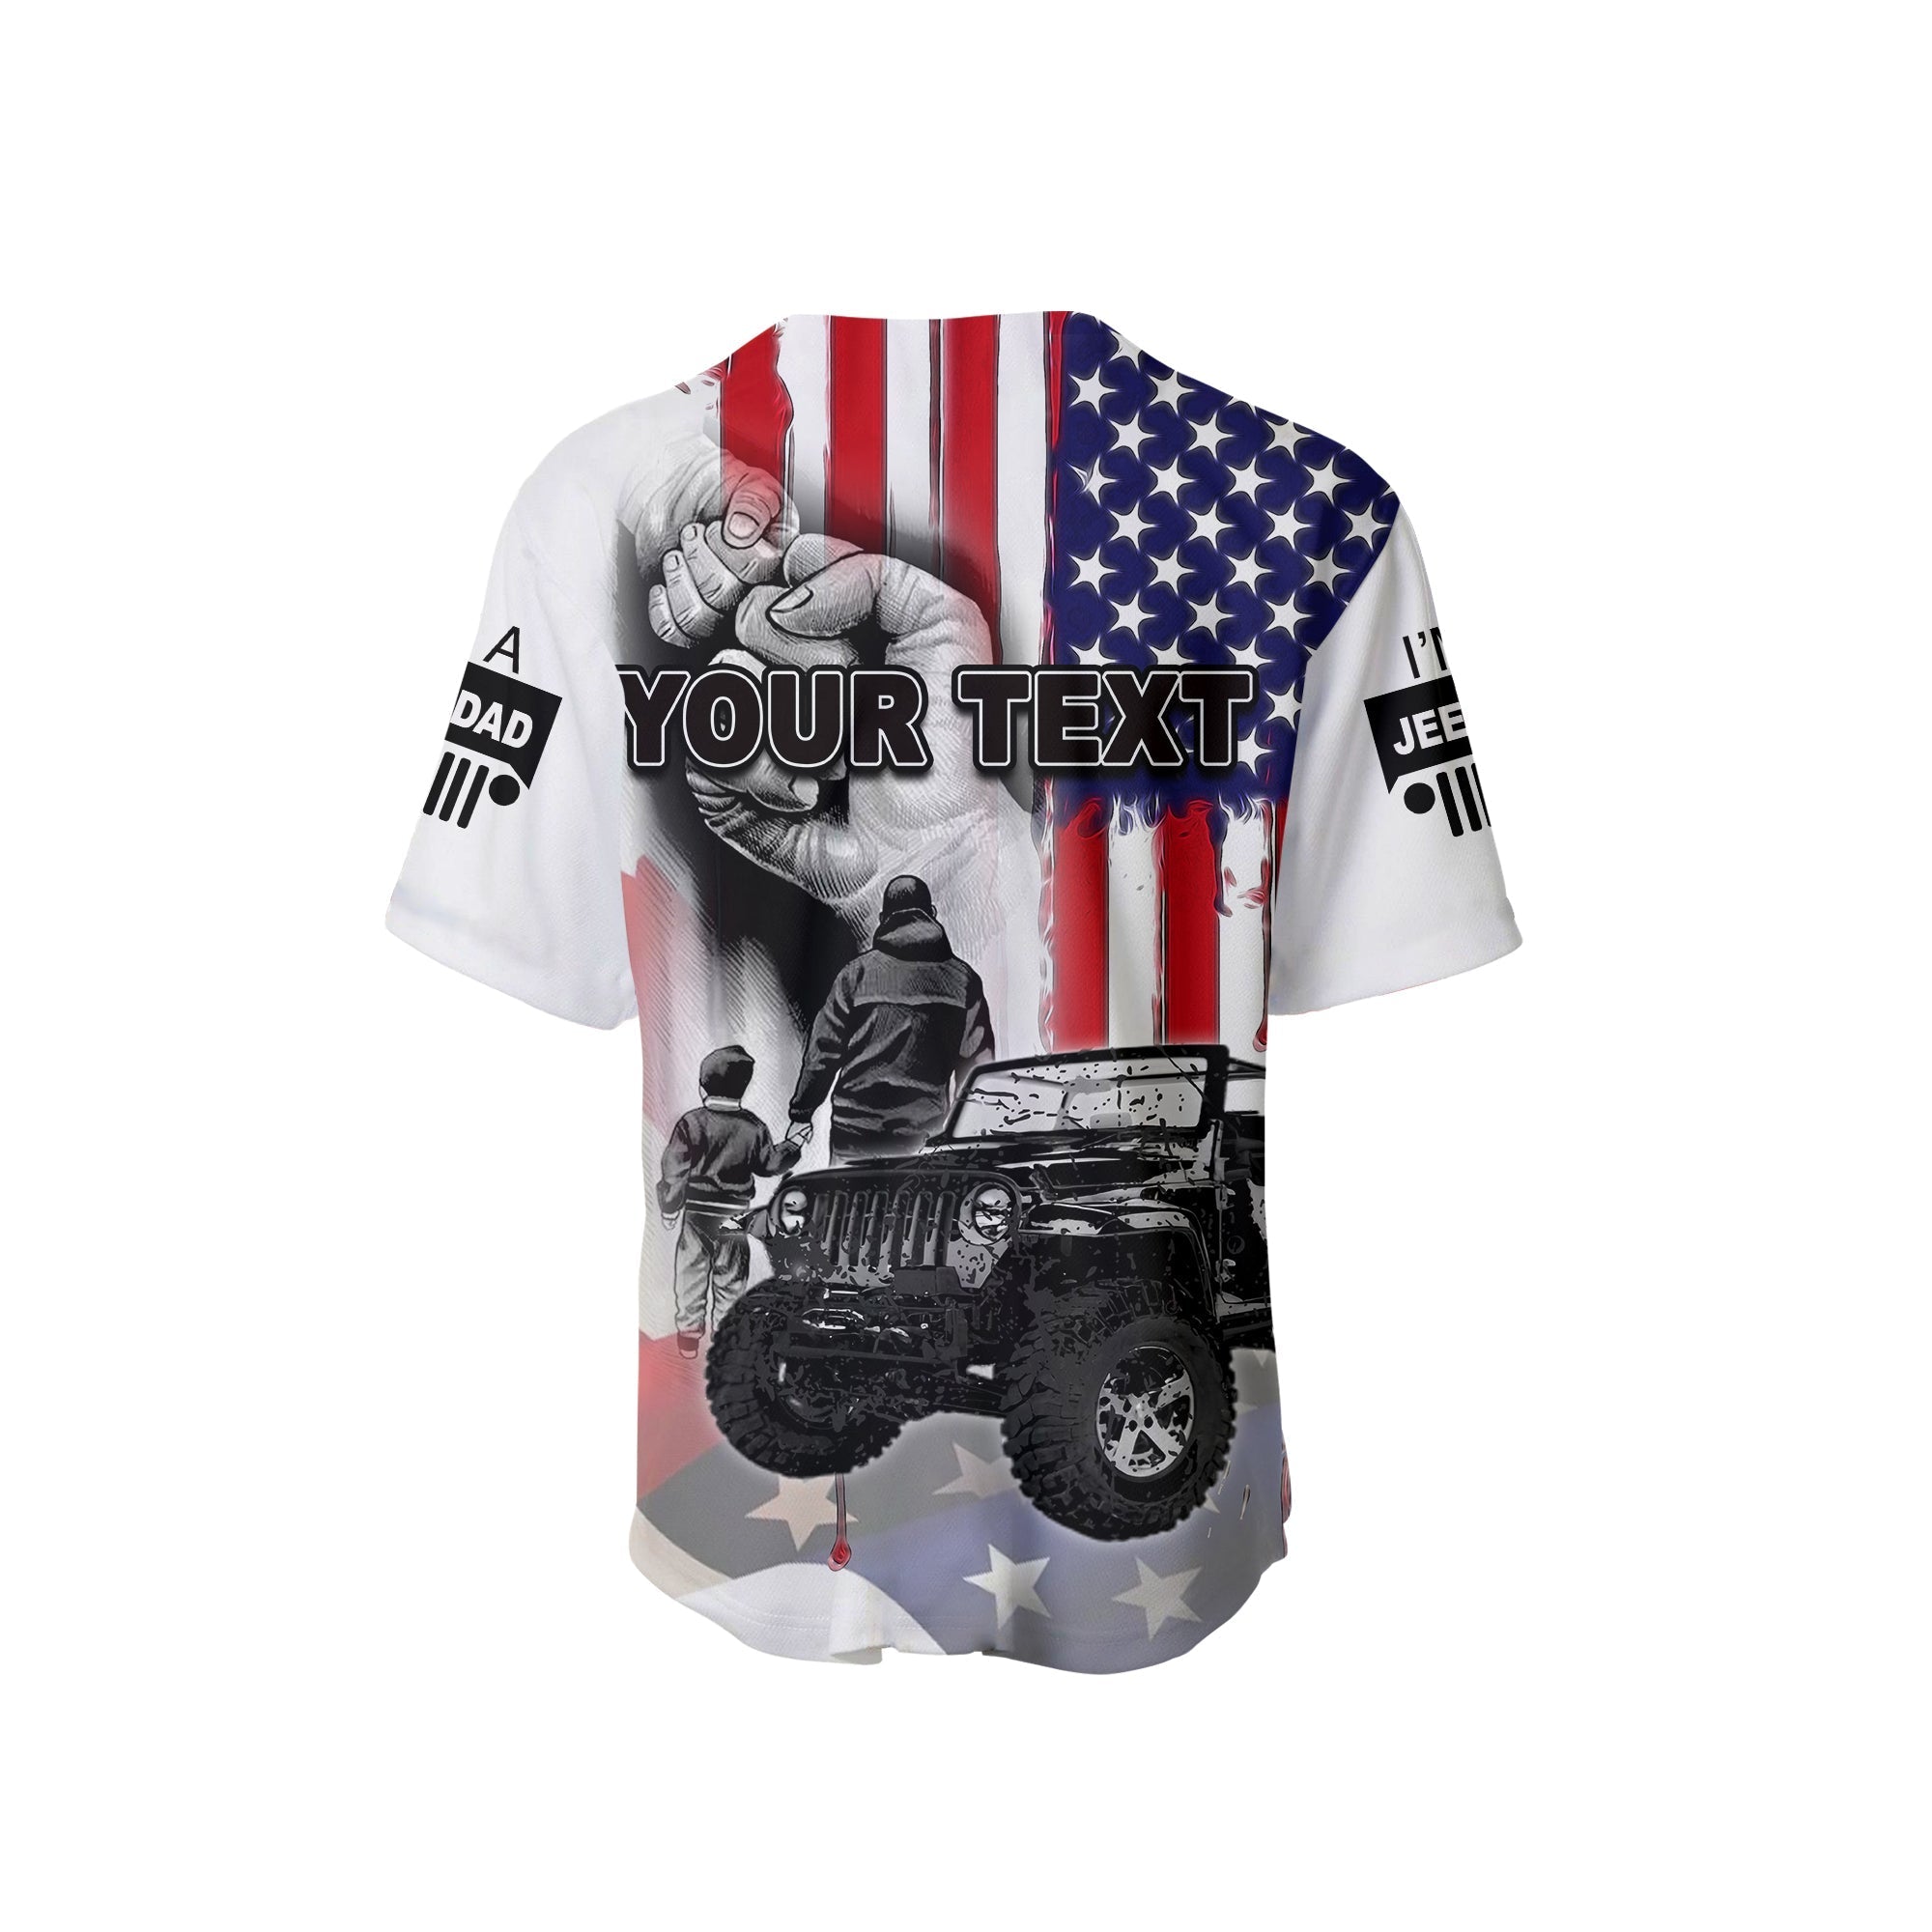 custom-personalised-father-day-baseball-jersey-jeep-dad-no2-white-style